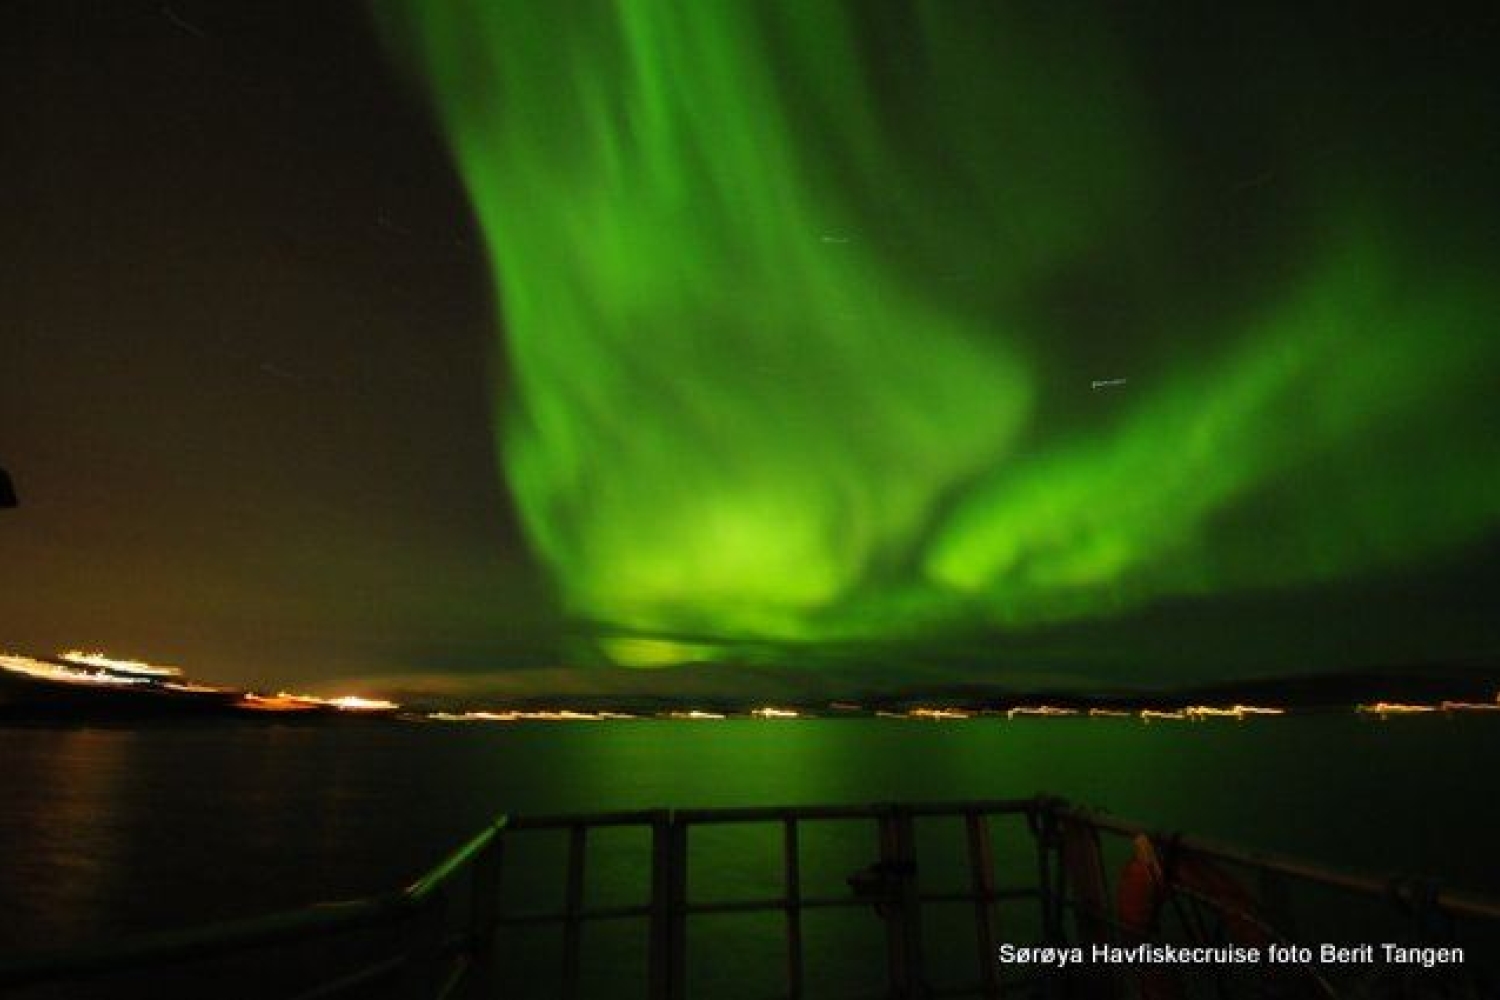 A Cozy Northern Light Dinner Cruise